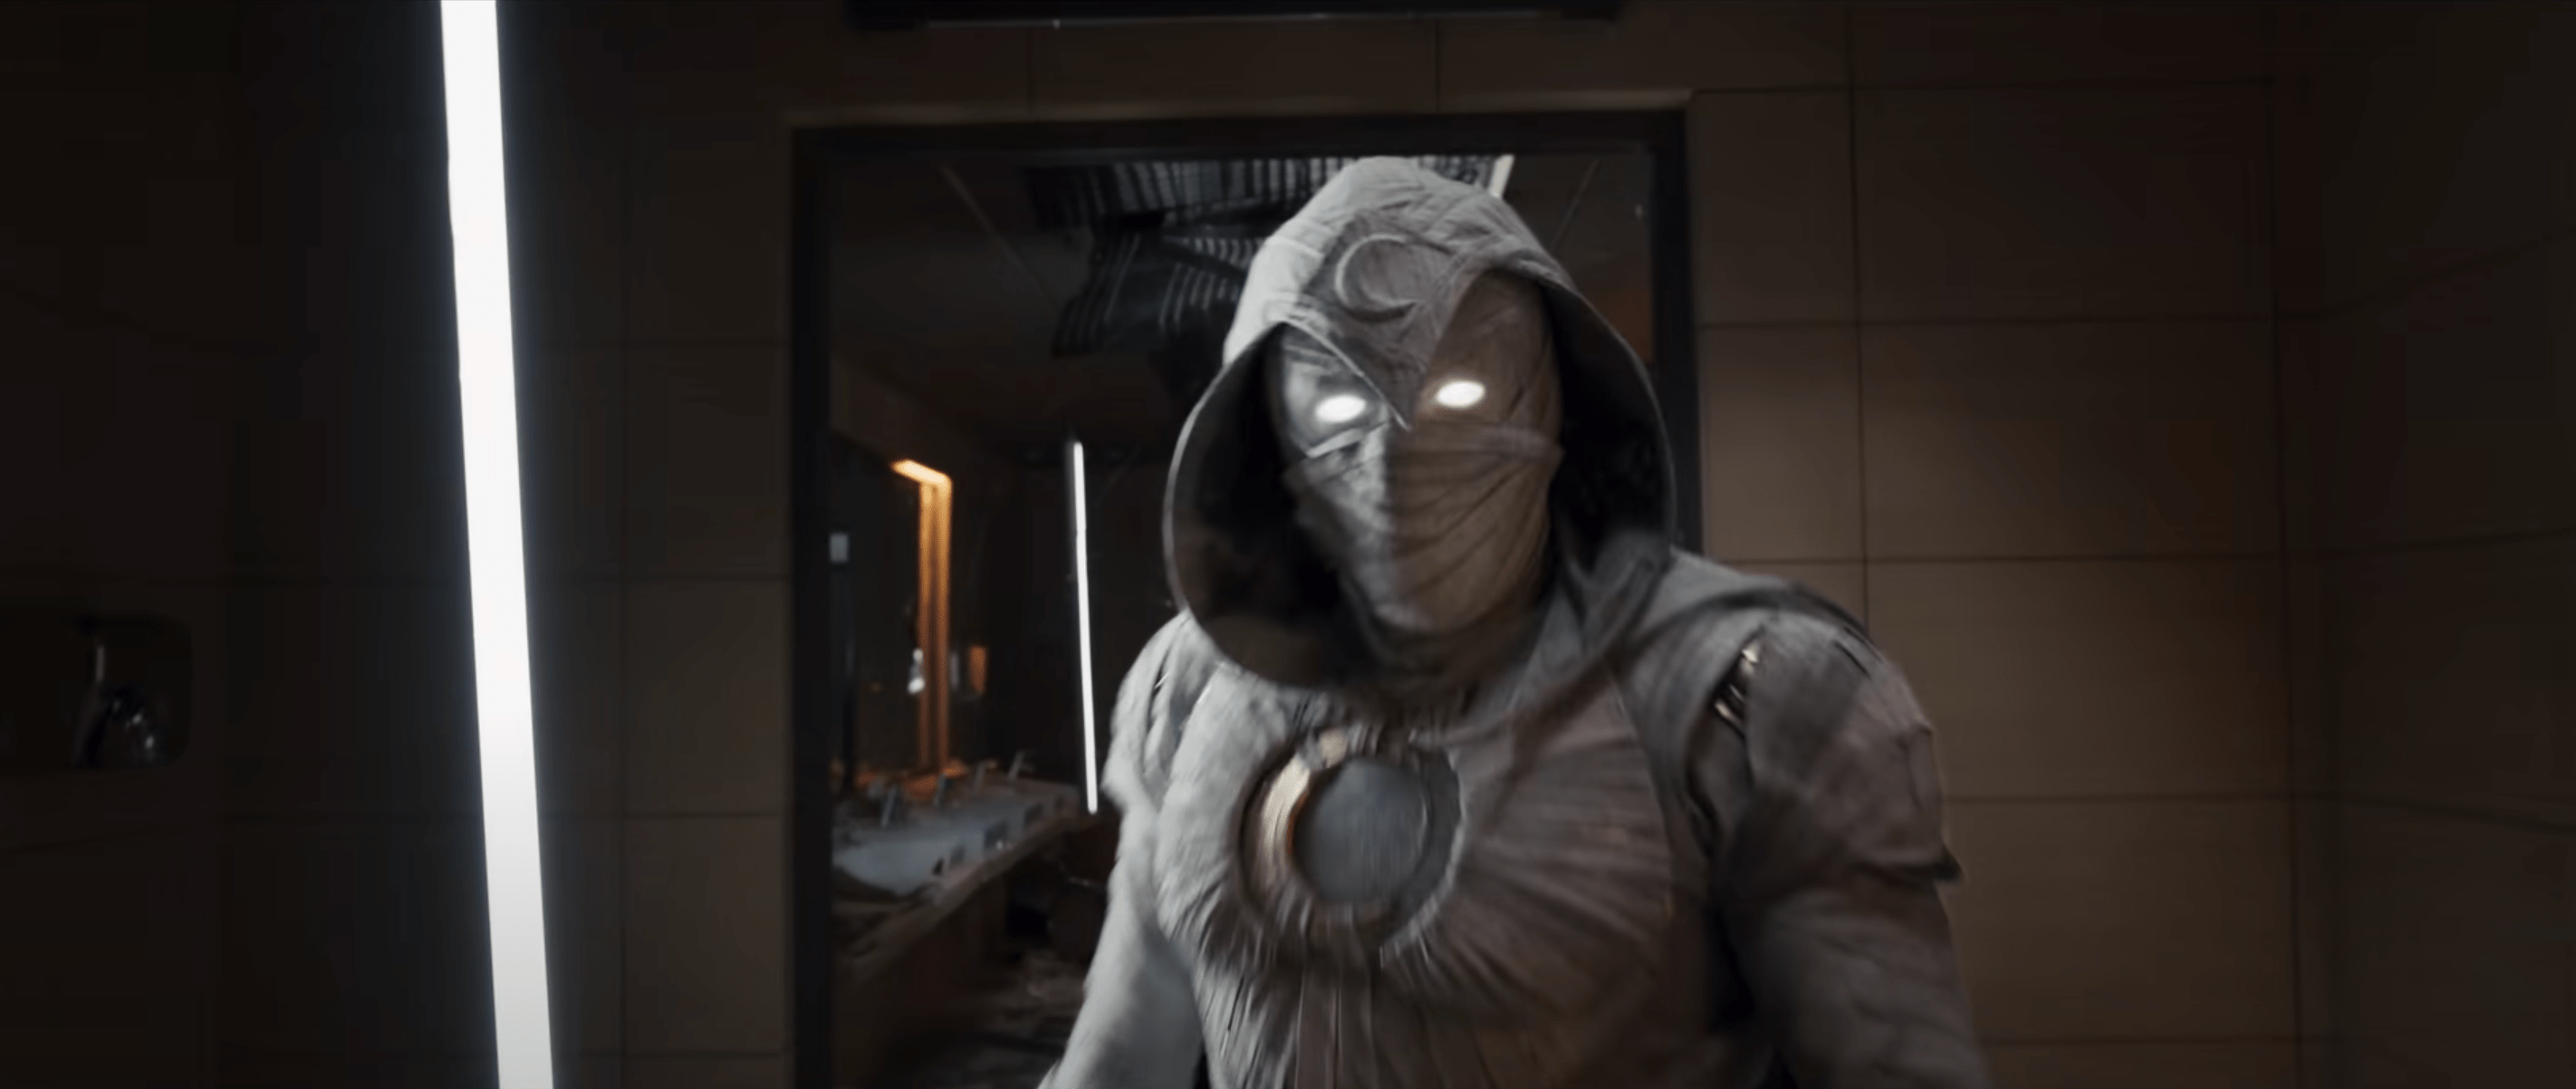 Marvel Studios Debuts the First Trailer For Moon Knight